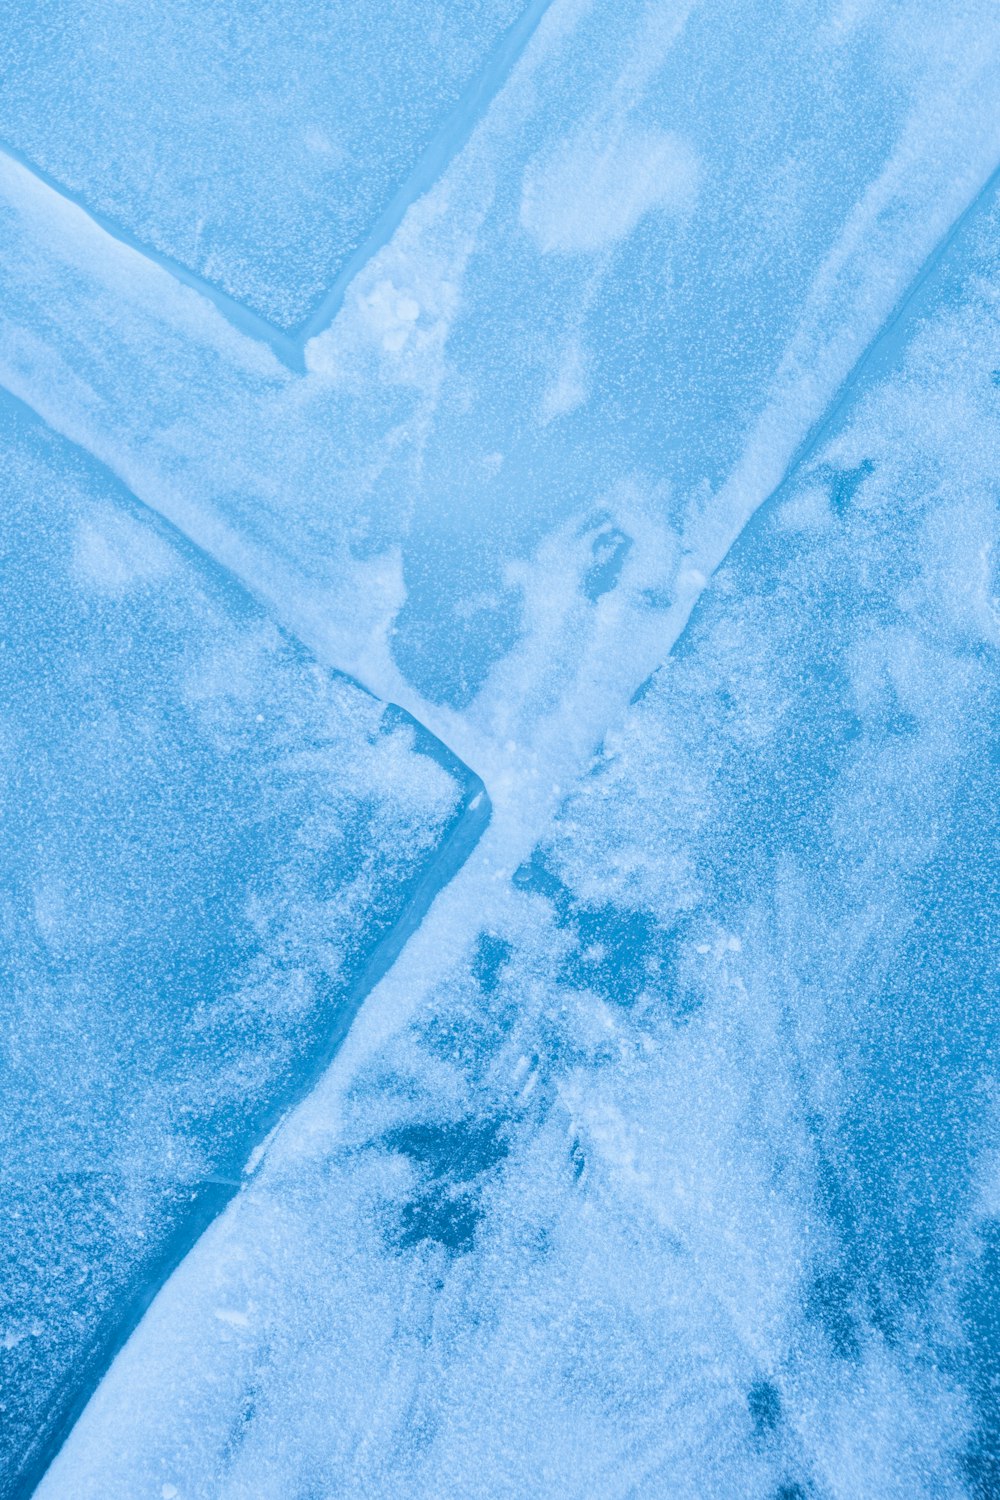 an airplane is flying over a patch of ice